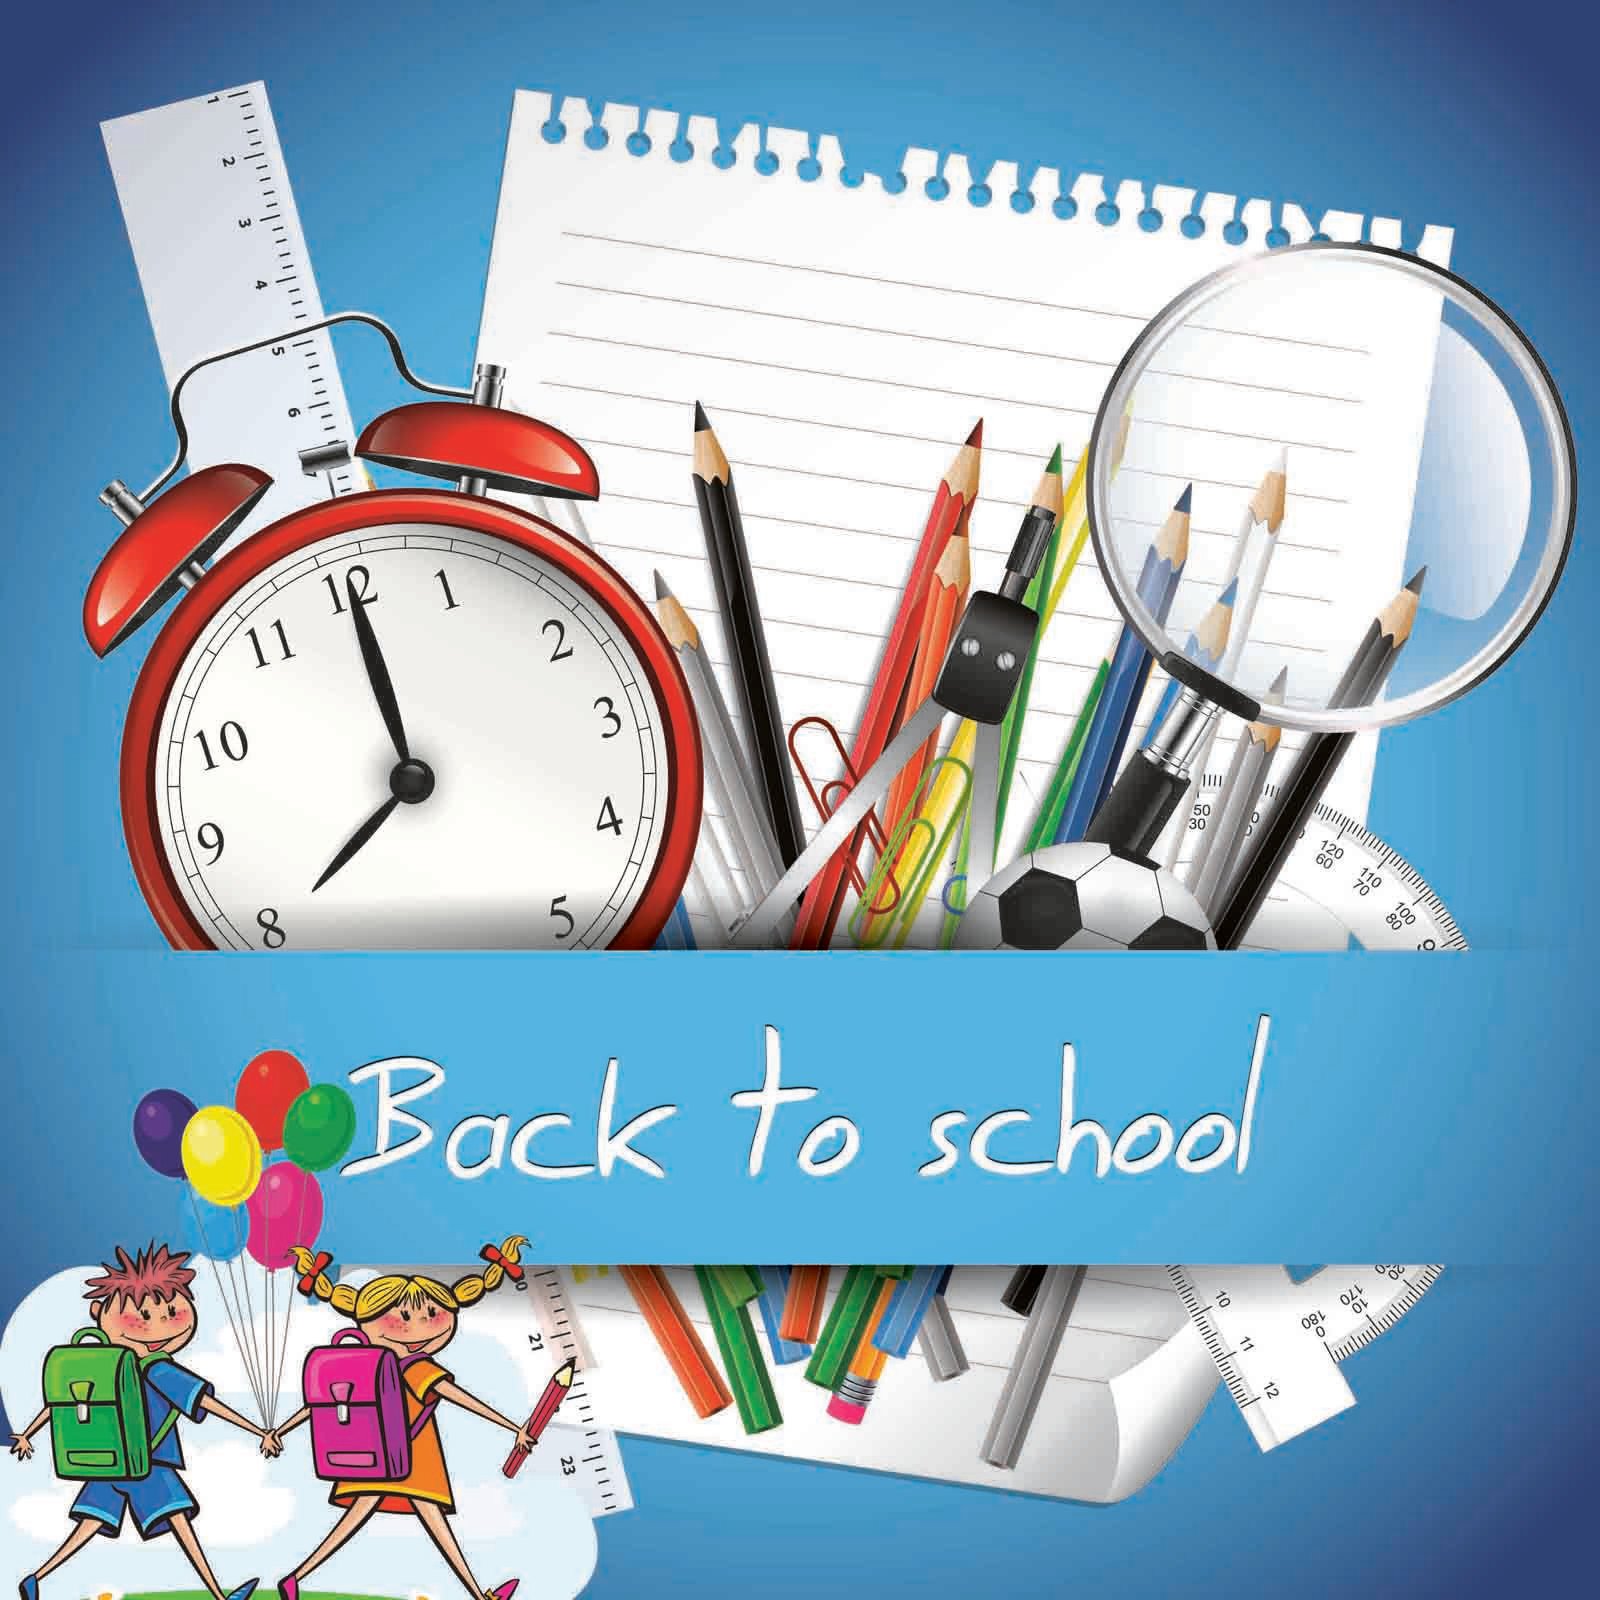 Back to Education School 1024x768 pixel PPT Background